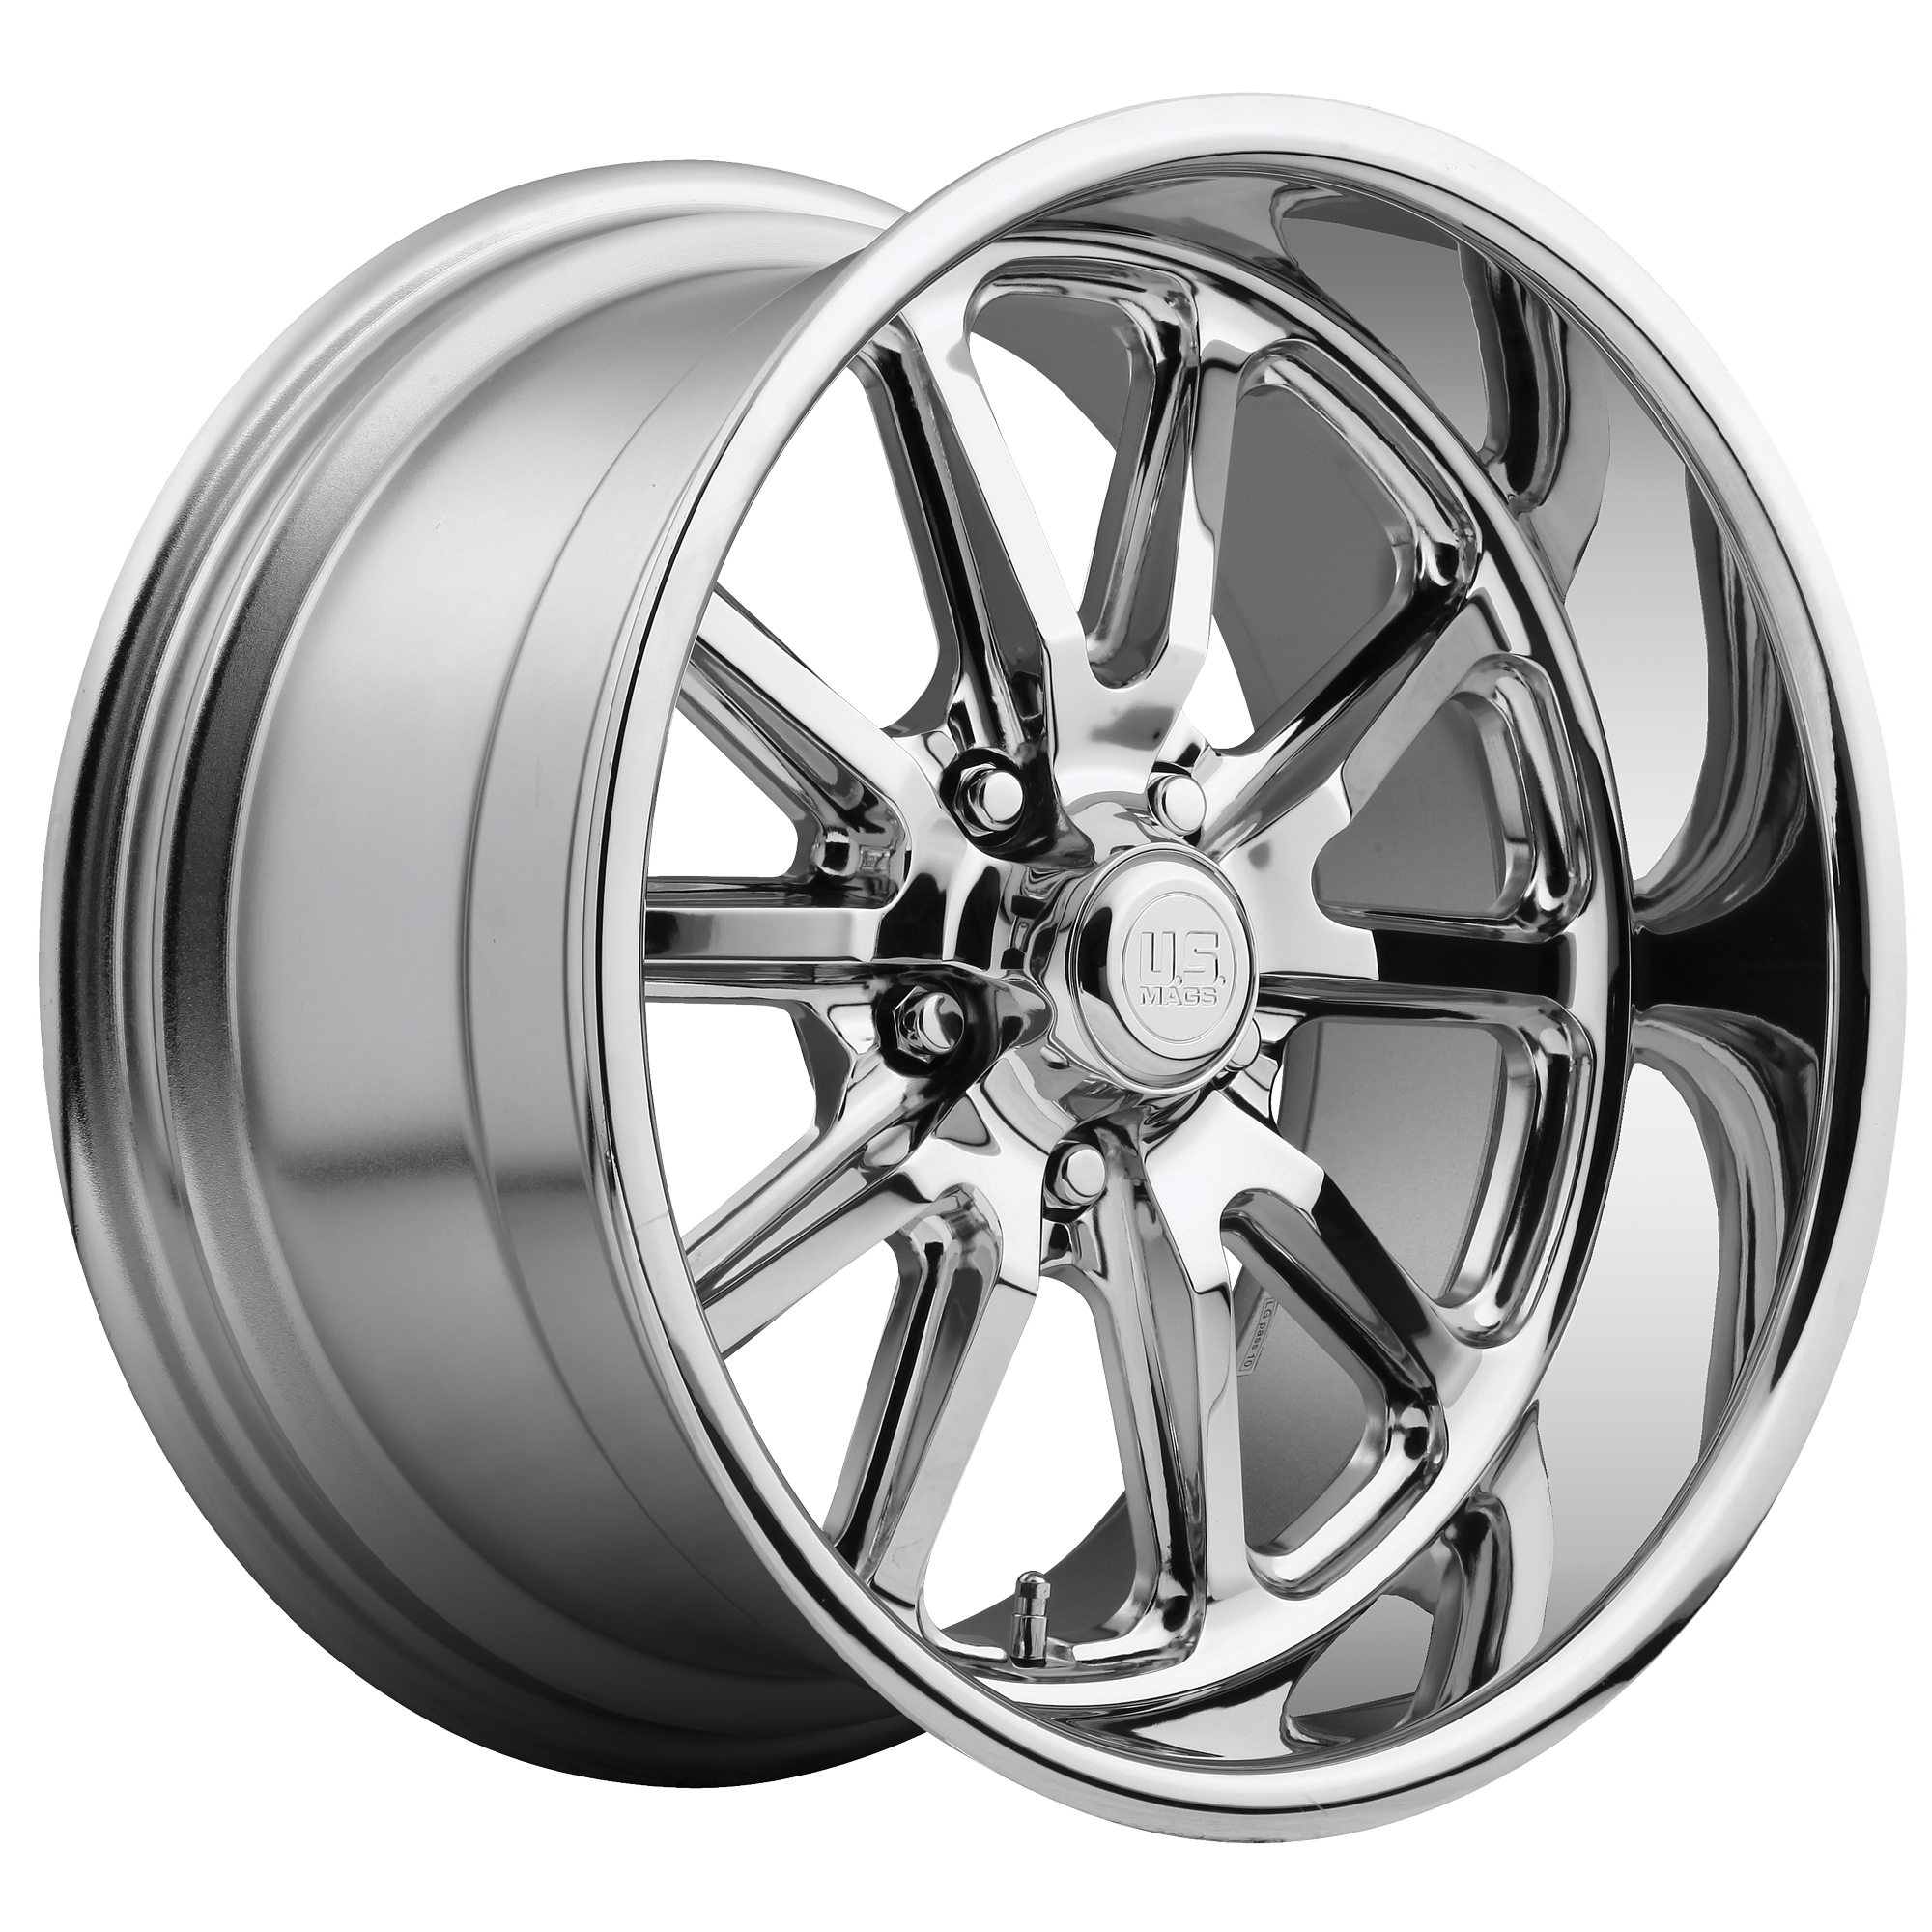 RAMBLER 15x8 5x120.65 CHROME PLATED (1 mm) - Tires and Engine Performance